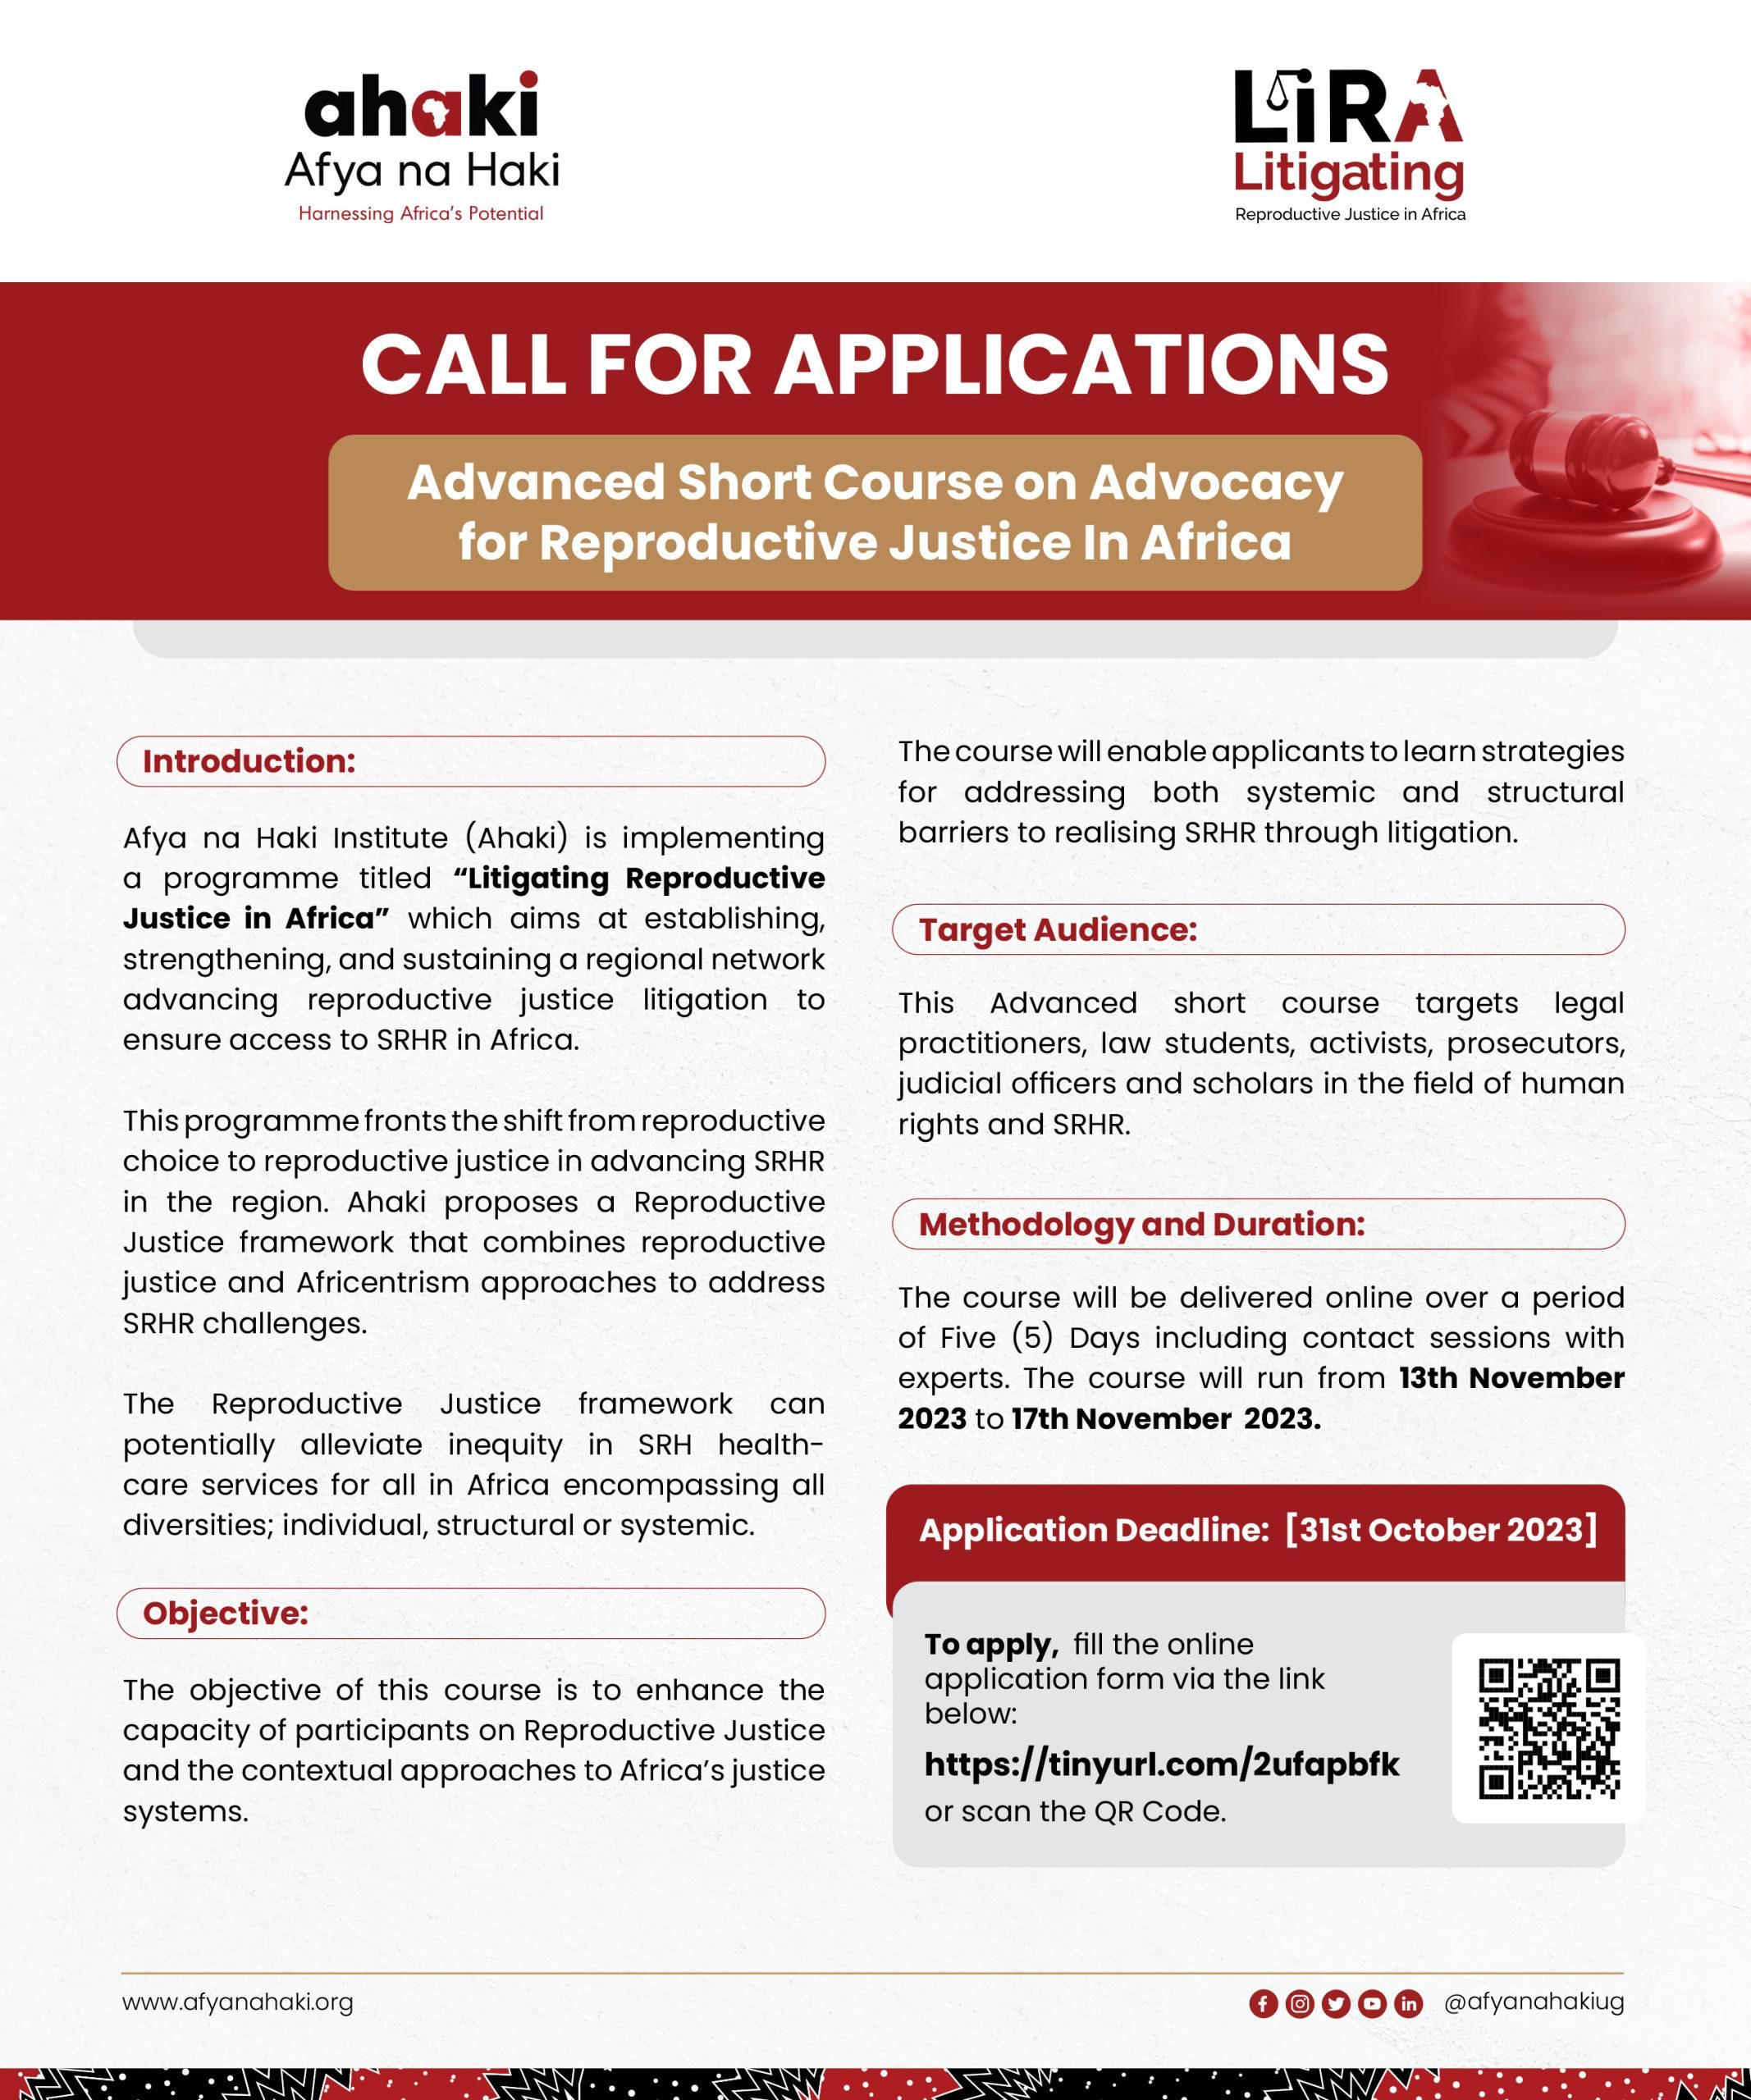 CALL FOR APPLICANTS ADVANCED SHORT COURSE ON REPRODUCTIVE JUSTICE IN AFRICA 3rd cohort